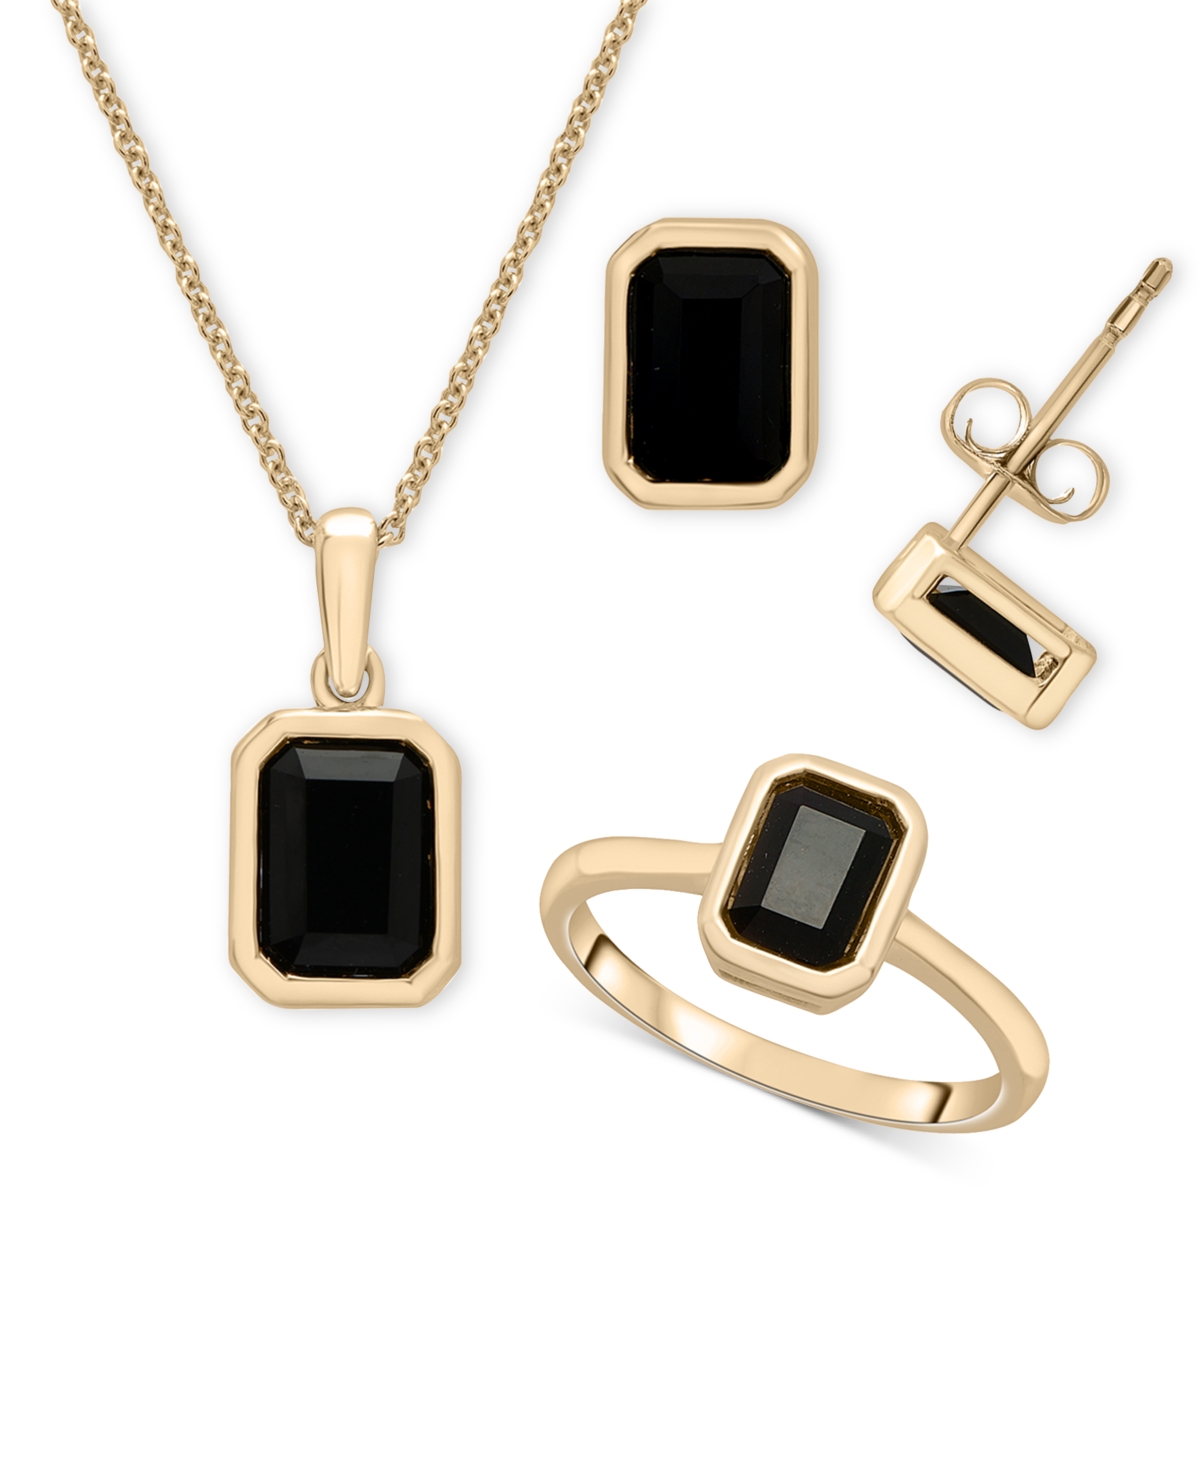 Macy's 3-pc. Set Onyx Octagon Pendant Necklace, Ring & Stud Earrings In 14k Gold-plated Sterling Silver